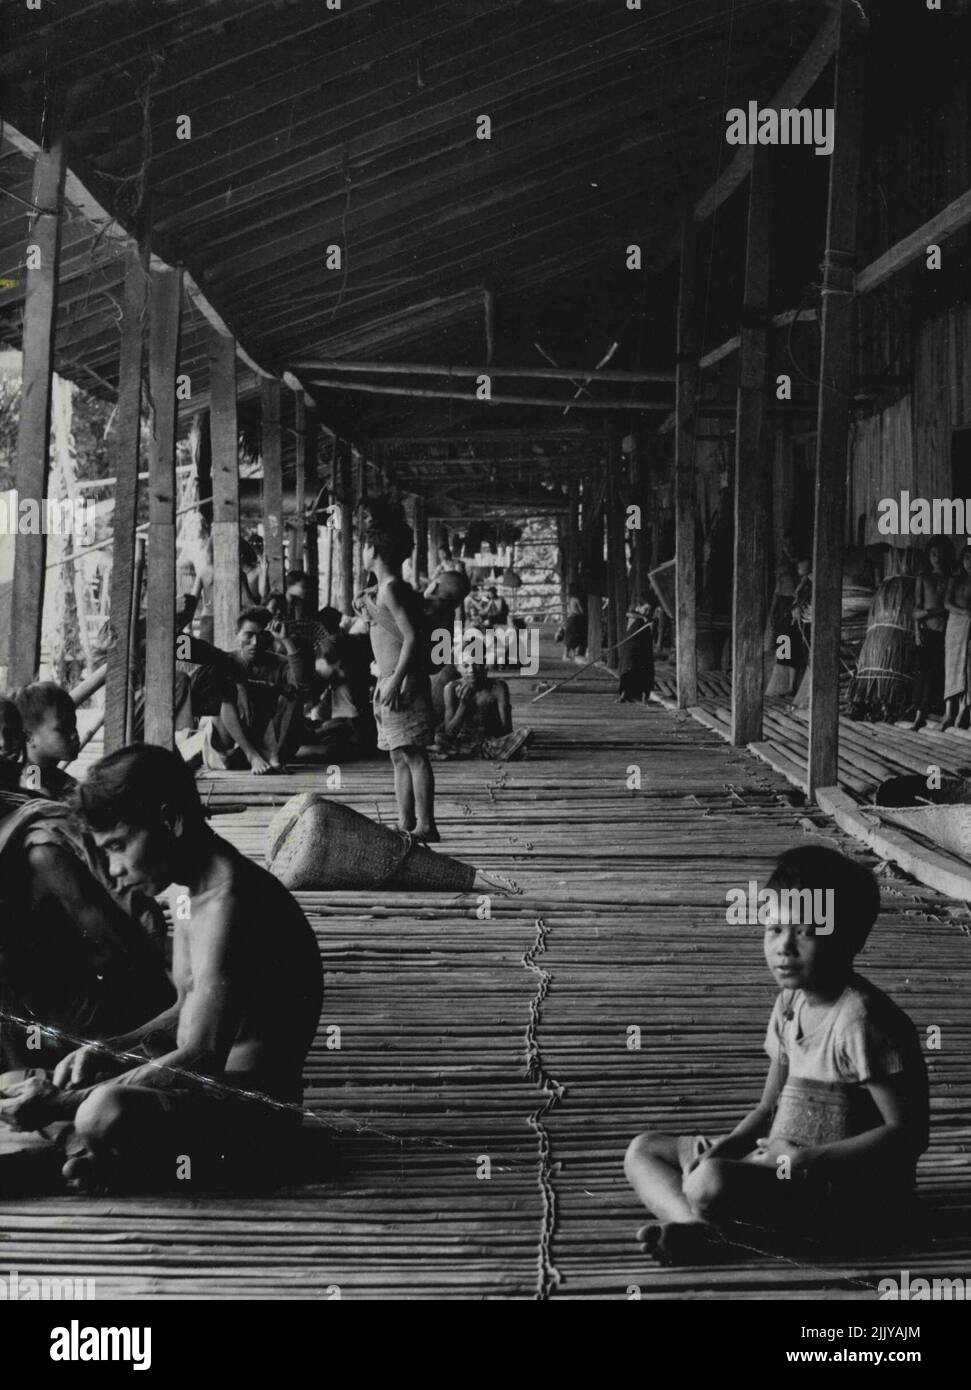 Land Dayaks Of Borneo A Dayak Longhouse: The long communal verandah, with the rooms of the individual households leading off from it. Women are pounding rice, and beside the wooden pounders lie winnowing baskets. Groups of men are gossiping or working, a boy is minding his baby brother, and against the wall are bundles of rattan vine for making mats and ropes. Fifty families, comprising up to 400 people, live in houses opening off this long communal veranda where women pound their rice. Rattan for making ropes is piled against the wall. March 8, 1952. (Photo by W.R. Geddes, Camera Press). Stock Photo